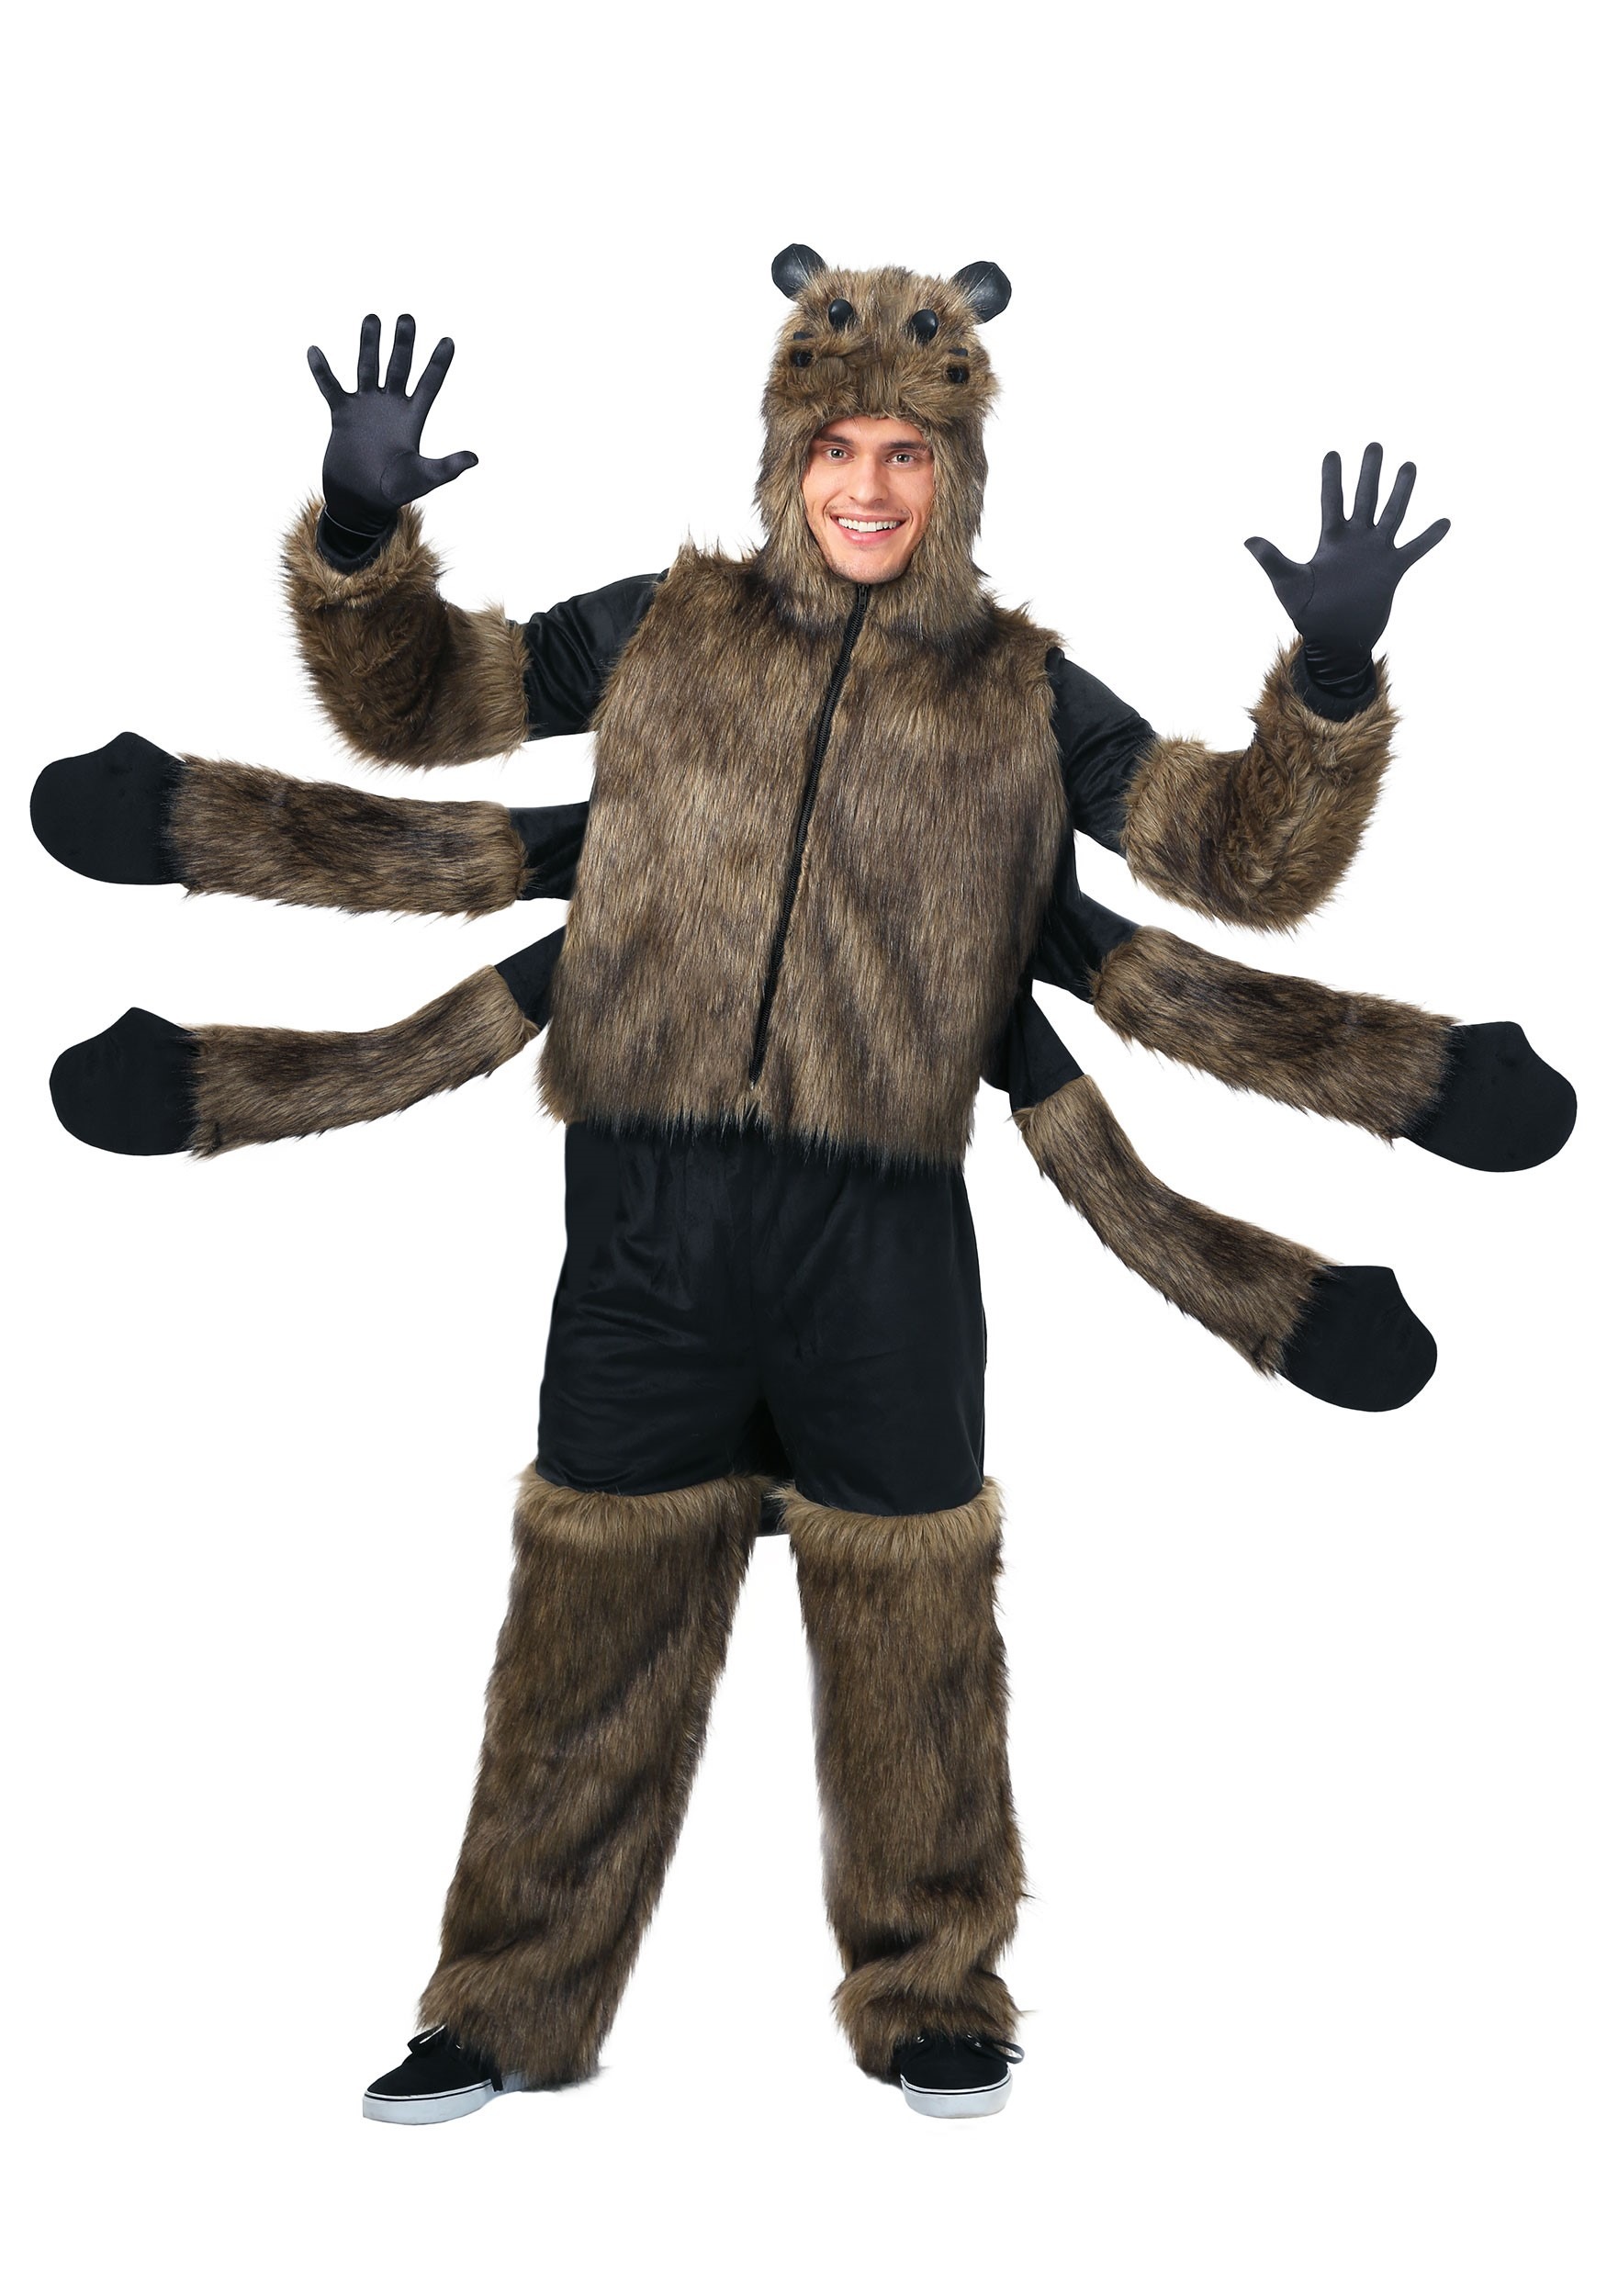 Photos - Fancy Dress FUN Costumes Furry Spider Costume for Adults | Bug Halloween Costumes Blac